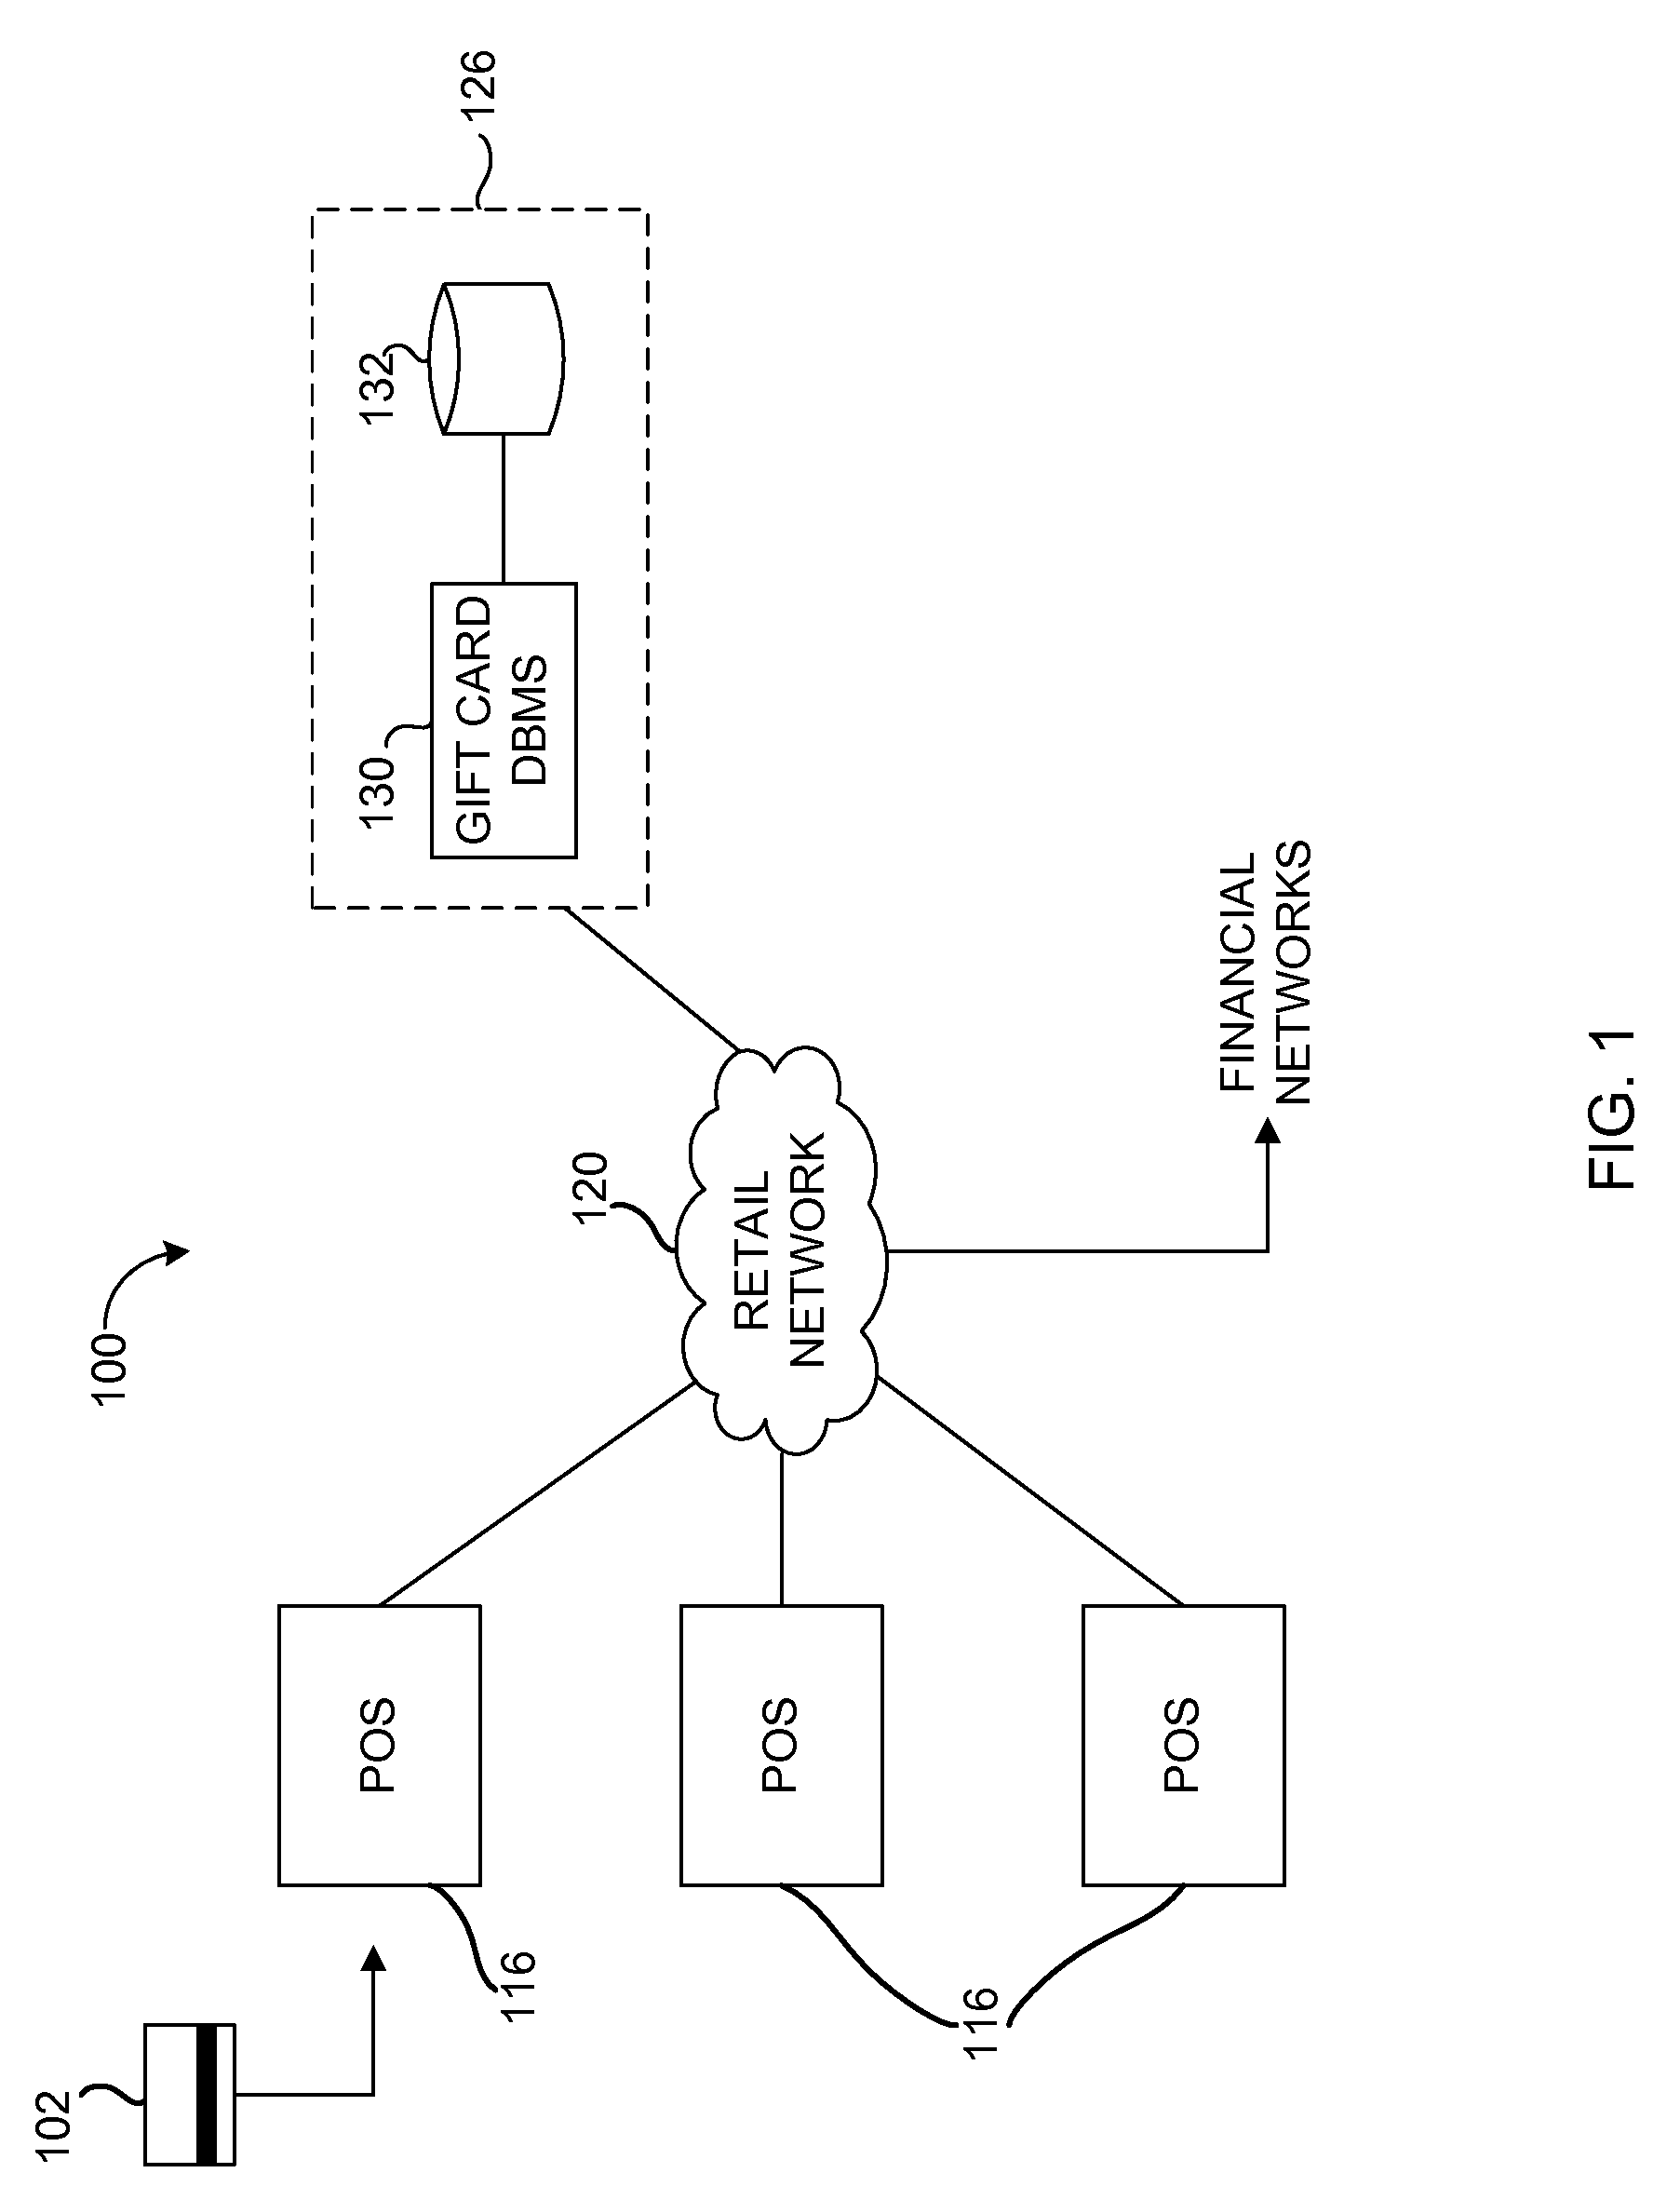 Stored value card transaction control systems and methods